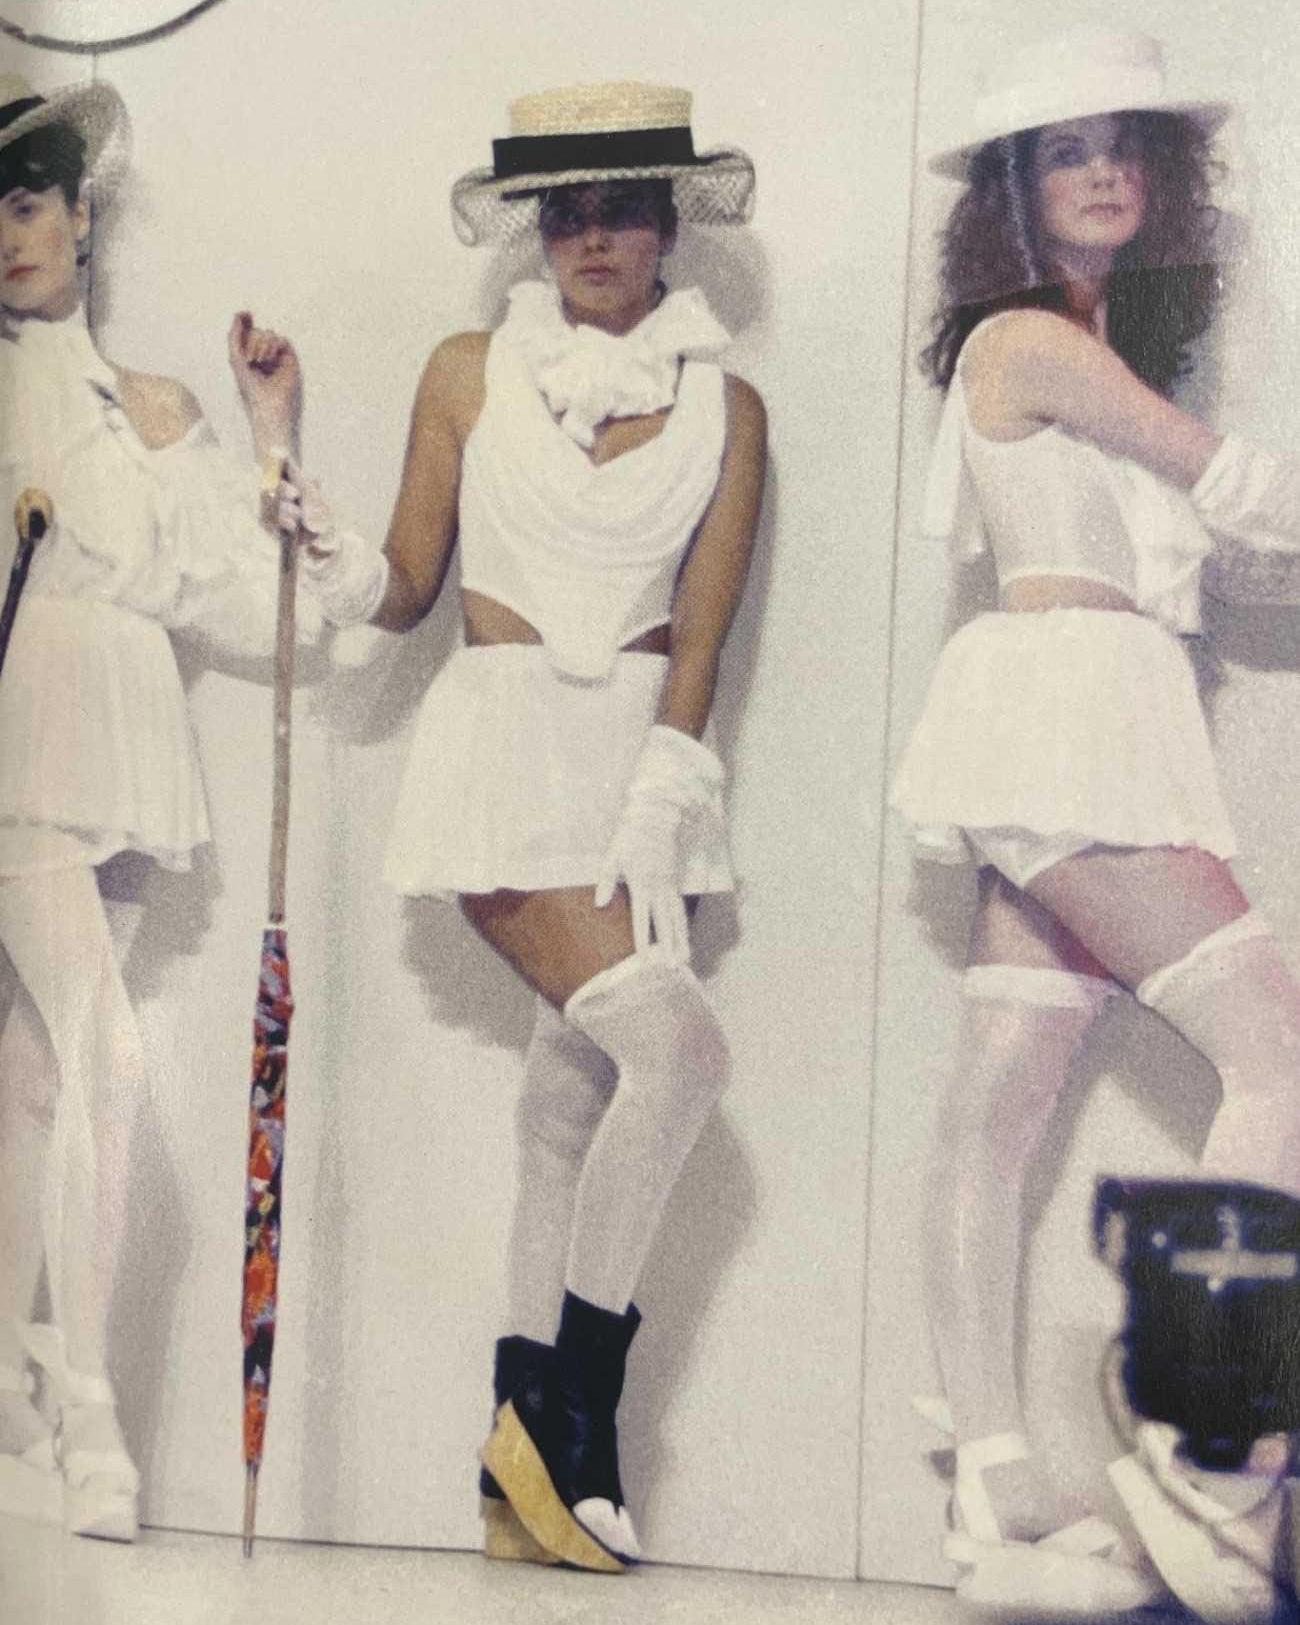 S/S 1988 Vivienne Westwood 'Britain Must Go Pagan' Collection white micro mini skirt with removable built-in bustle. Gathered mini skirt with four large built-in bustle padded balls that are attached with safety pins (removable as desired). Fabric